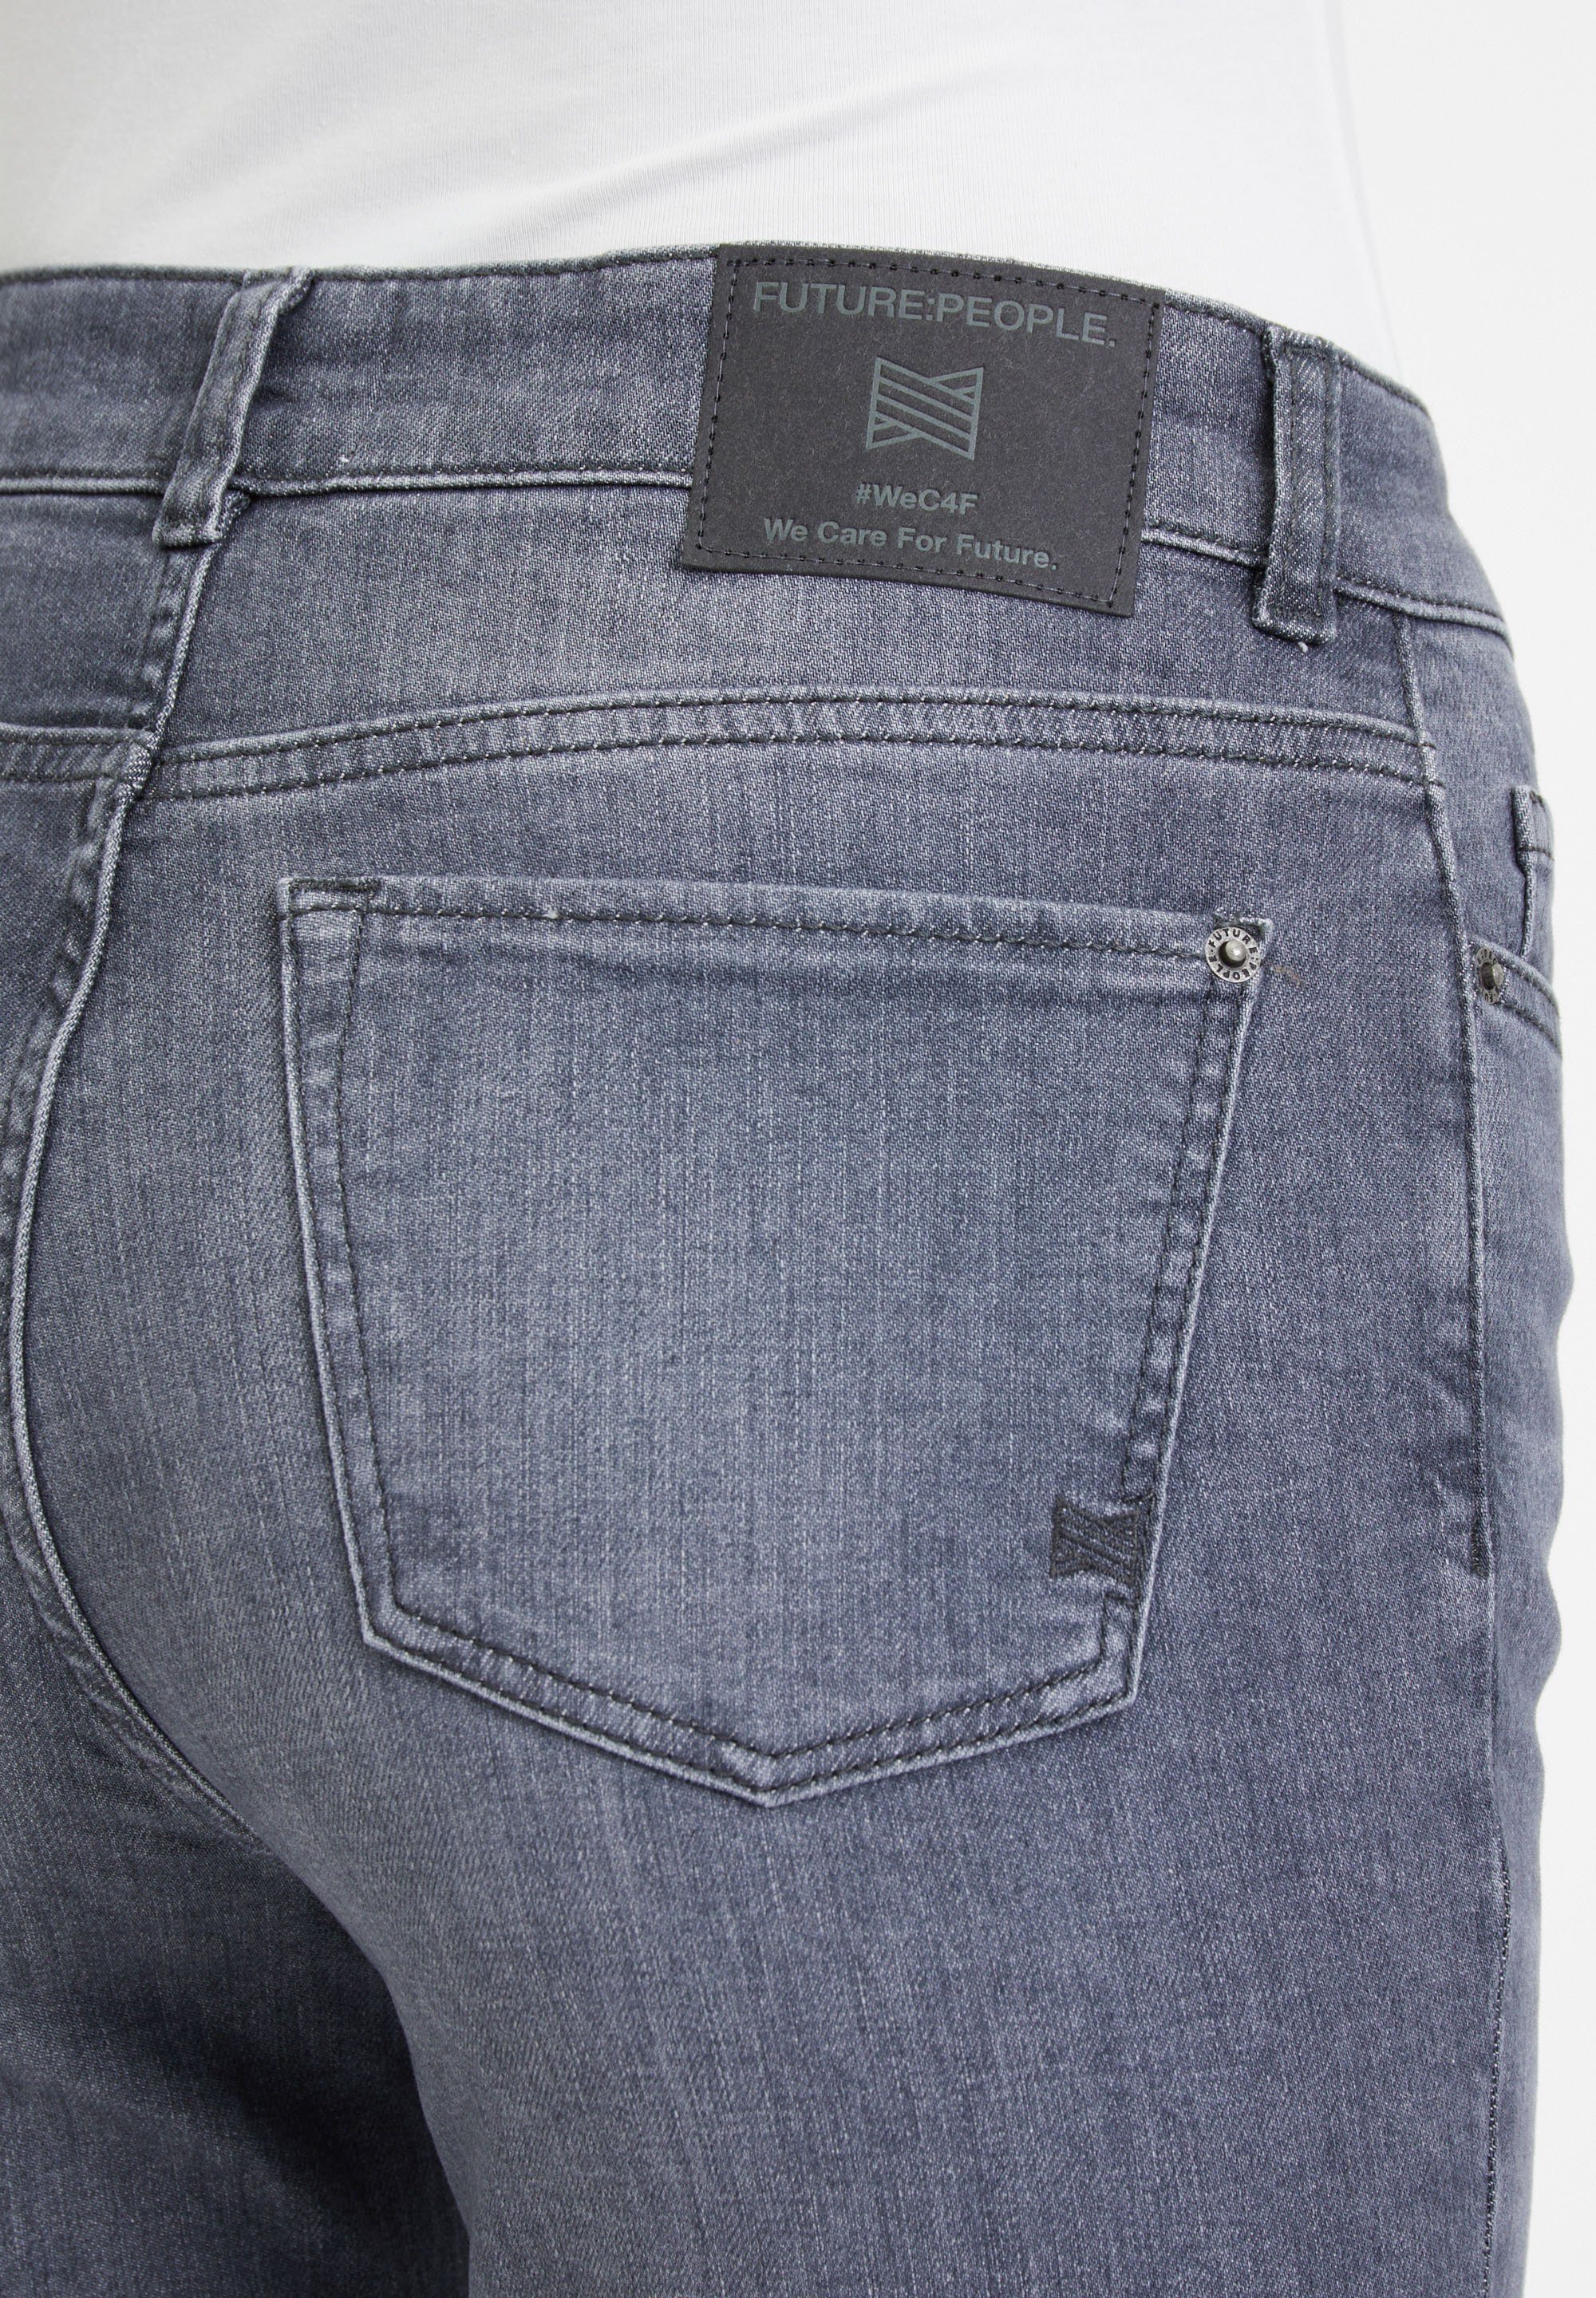 #WeC4F BOOTCUT Care USED We FUTURE:PEOPLE. 01:02 Future. - - GREY Slim-fit-Jeans MID WAIST for AUTHENTIC